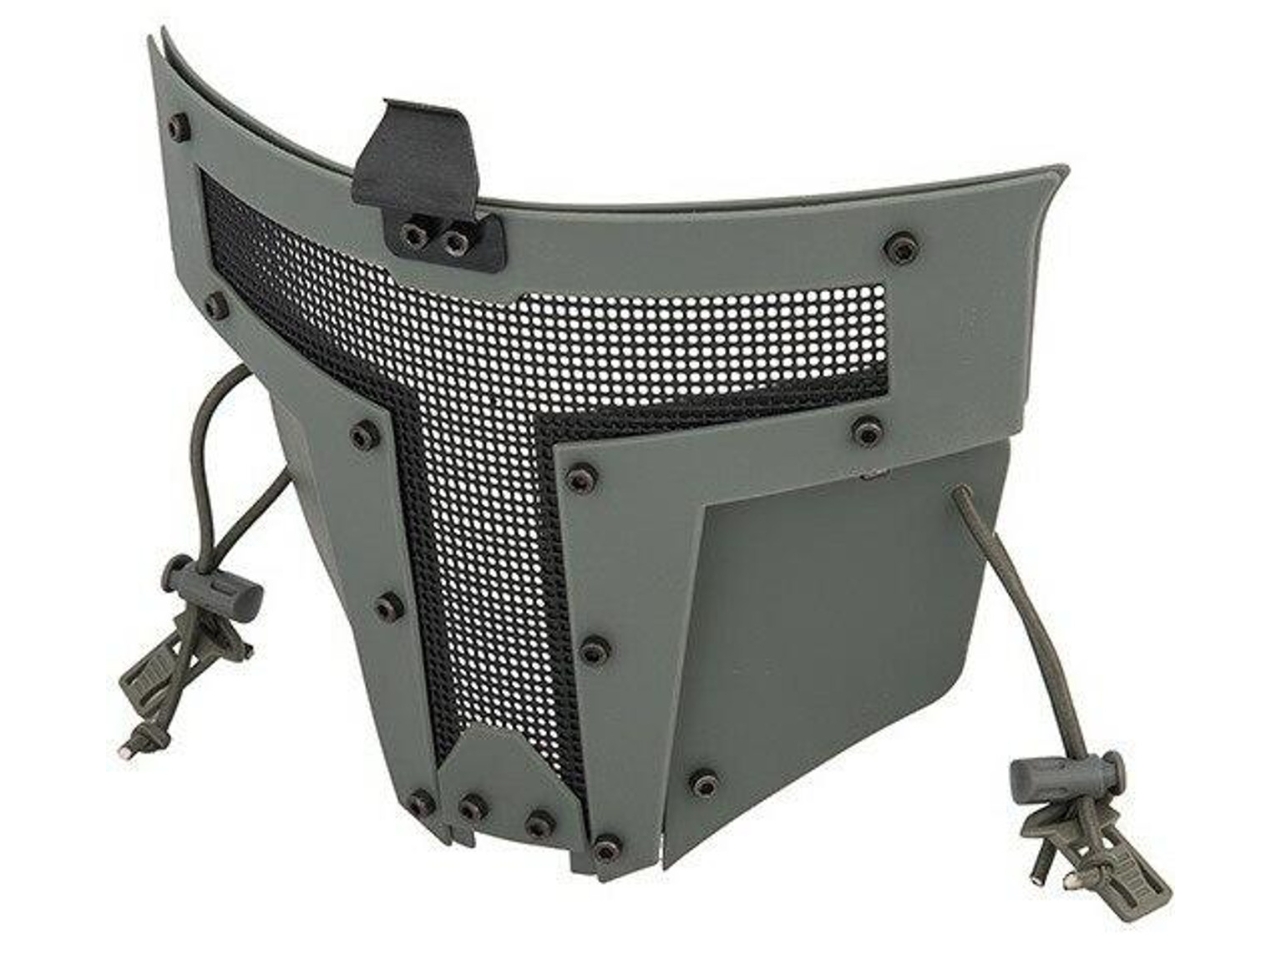 UK Arms Mesh Mask for Airsoft Helmet Systems, Gray, Grey